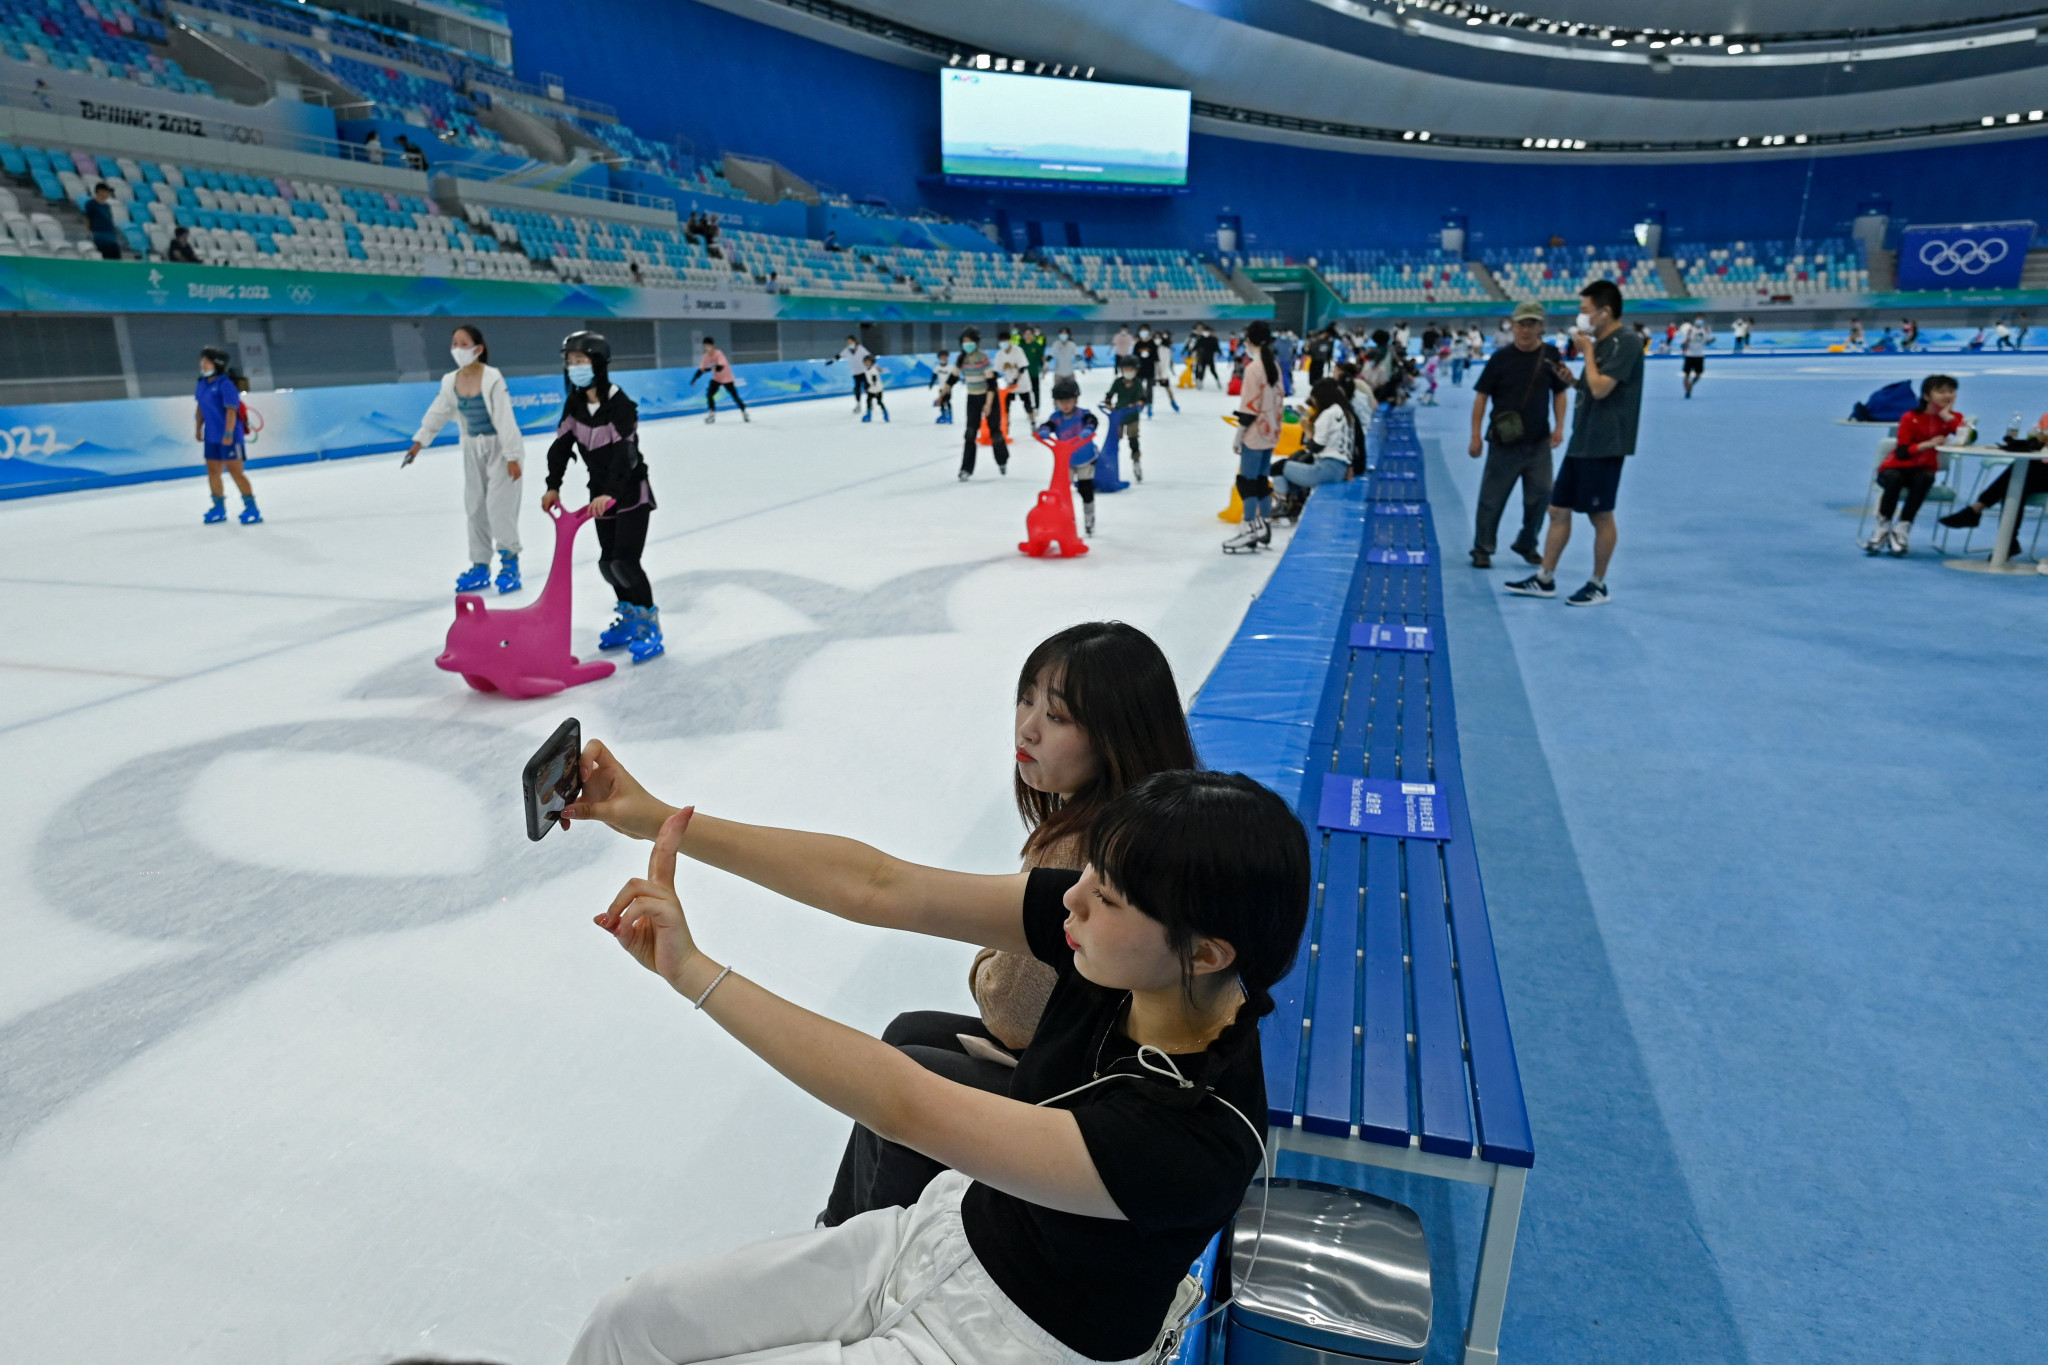  Beijing's "Ice Ribbon" said to have attracted over 210,000 visitors in eight months